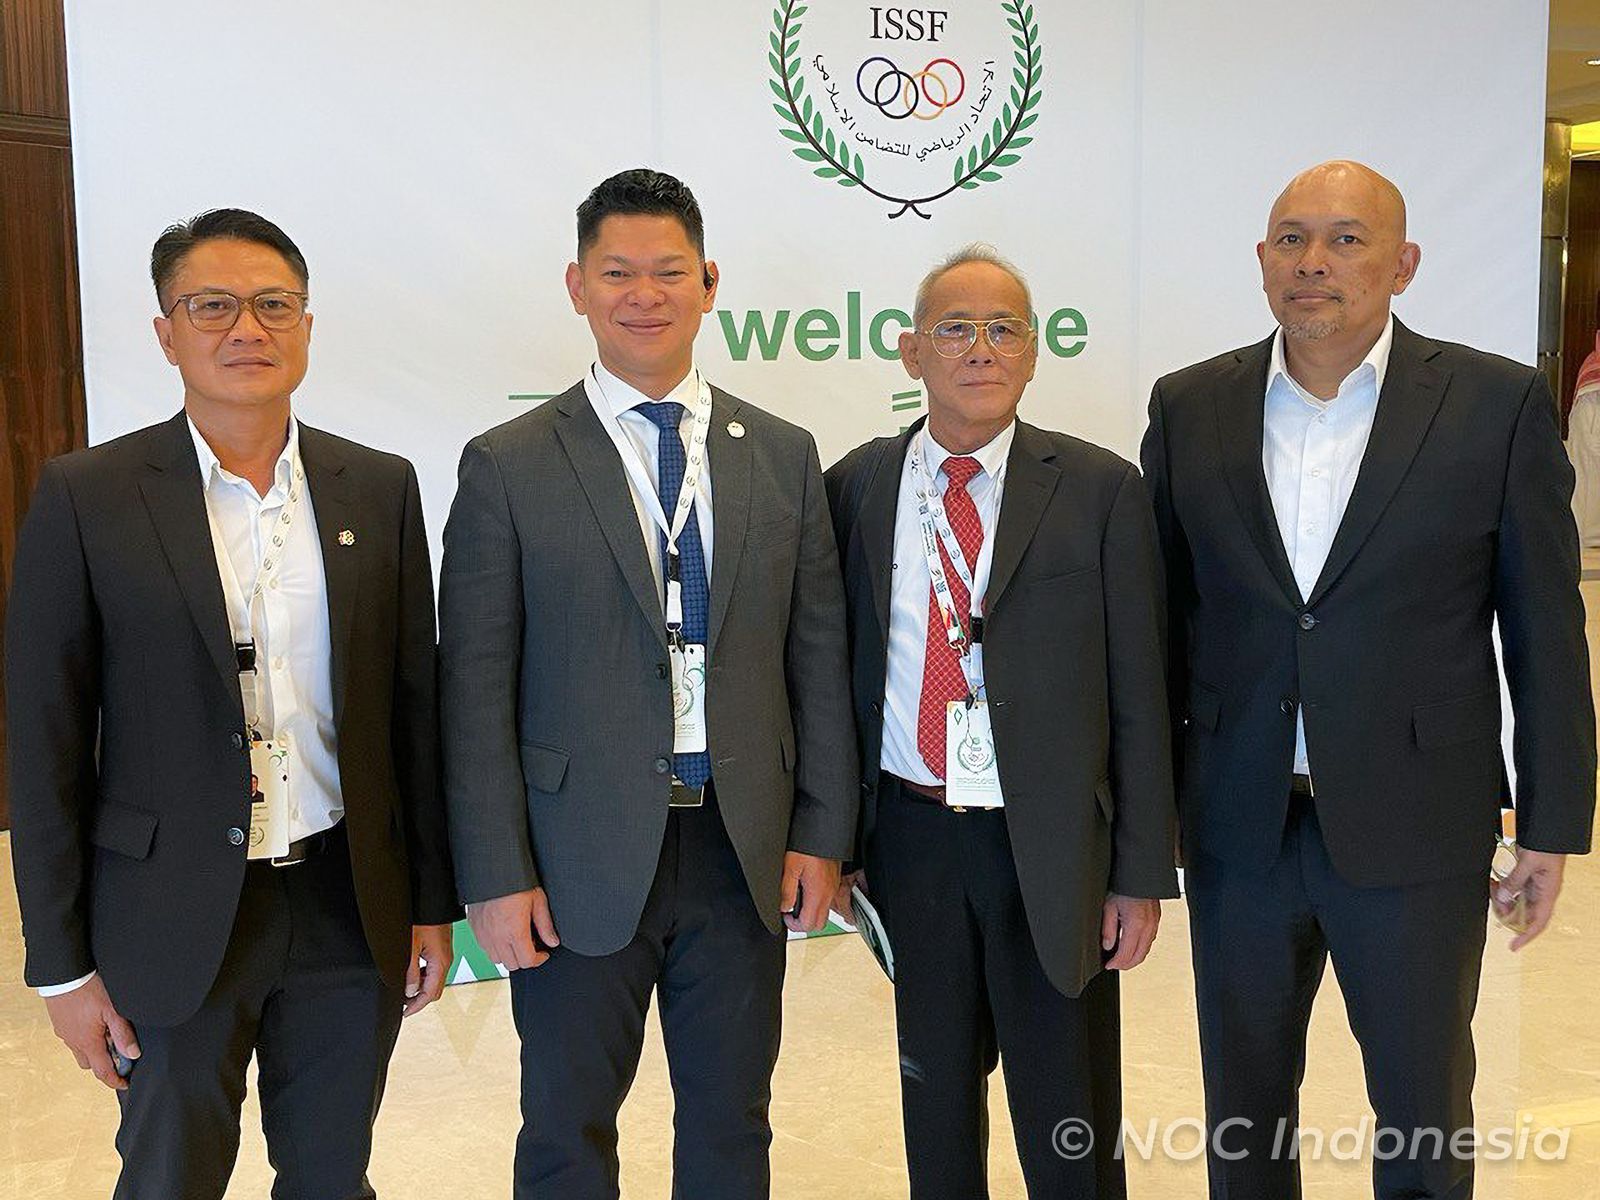 ISSF Calls for Sports Solidarity for Palestine - Indonesia Olympic Commitee